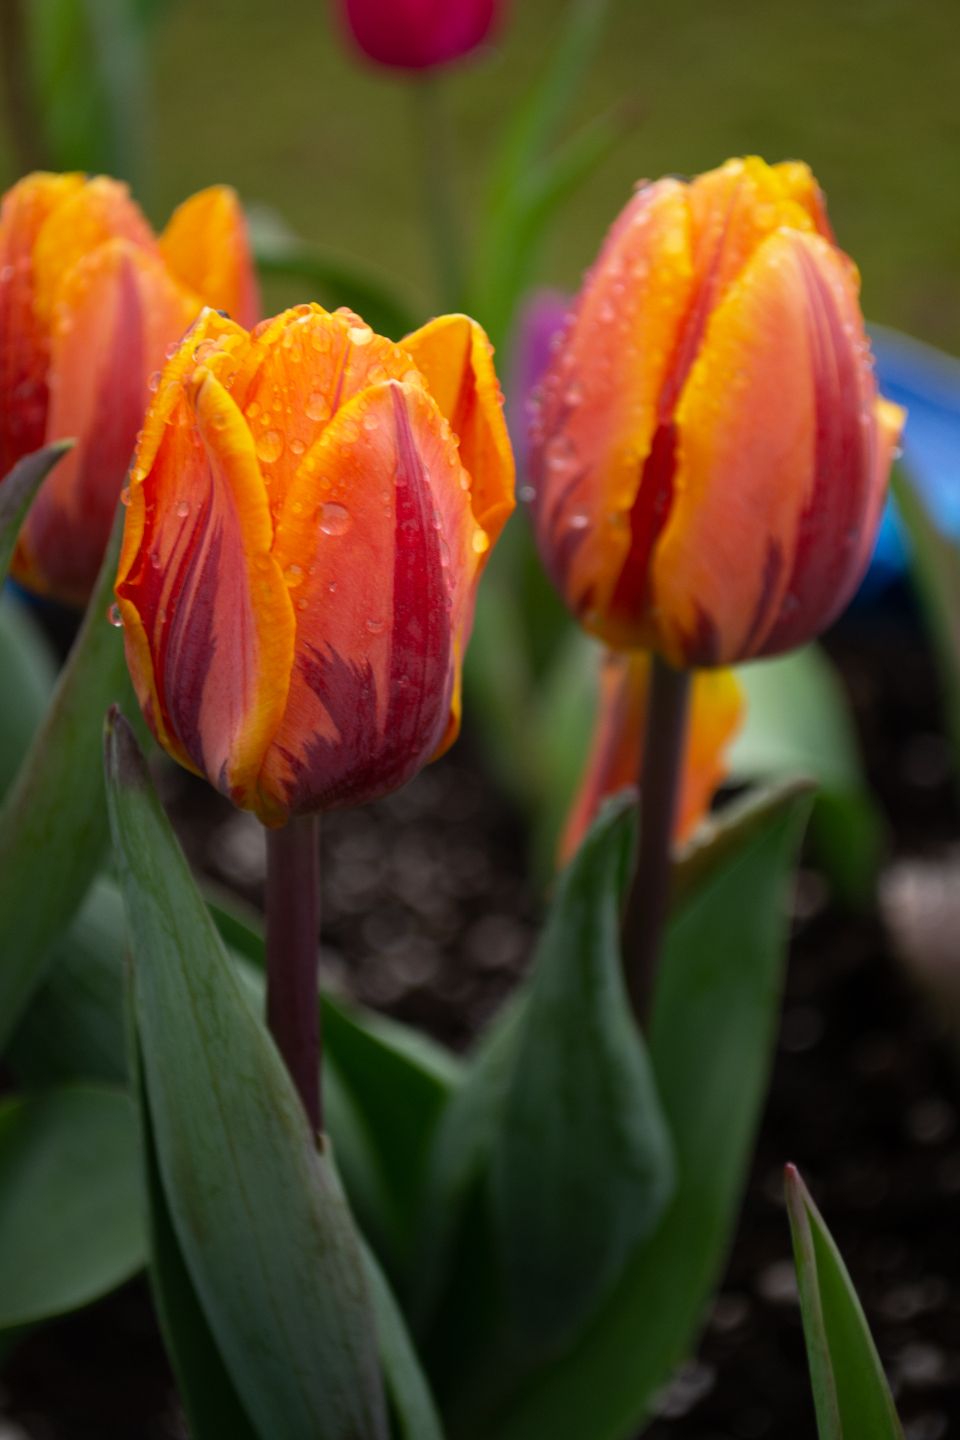 close up image of three variegated tulips with orange, red, and yellow petals